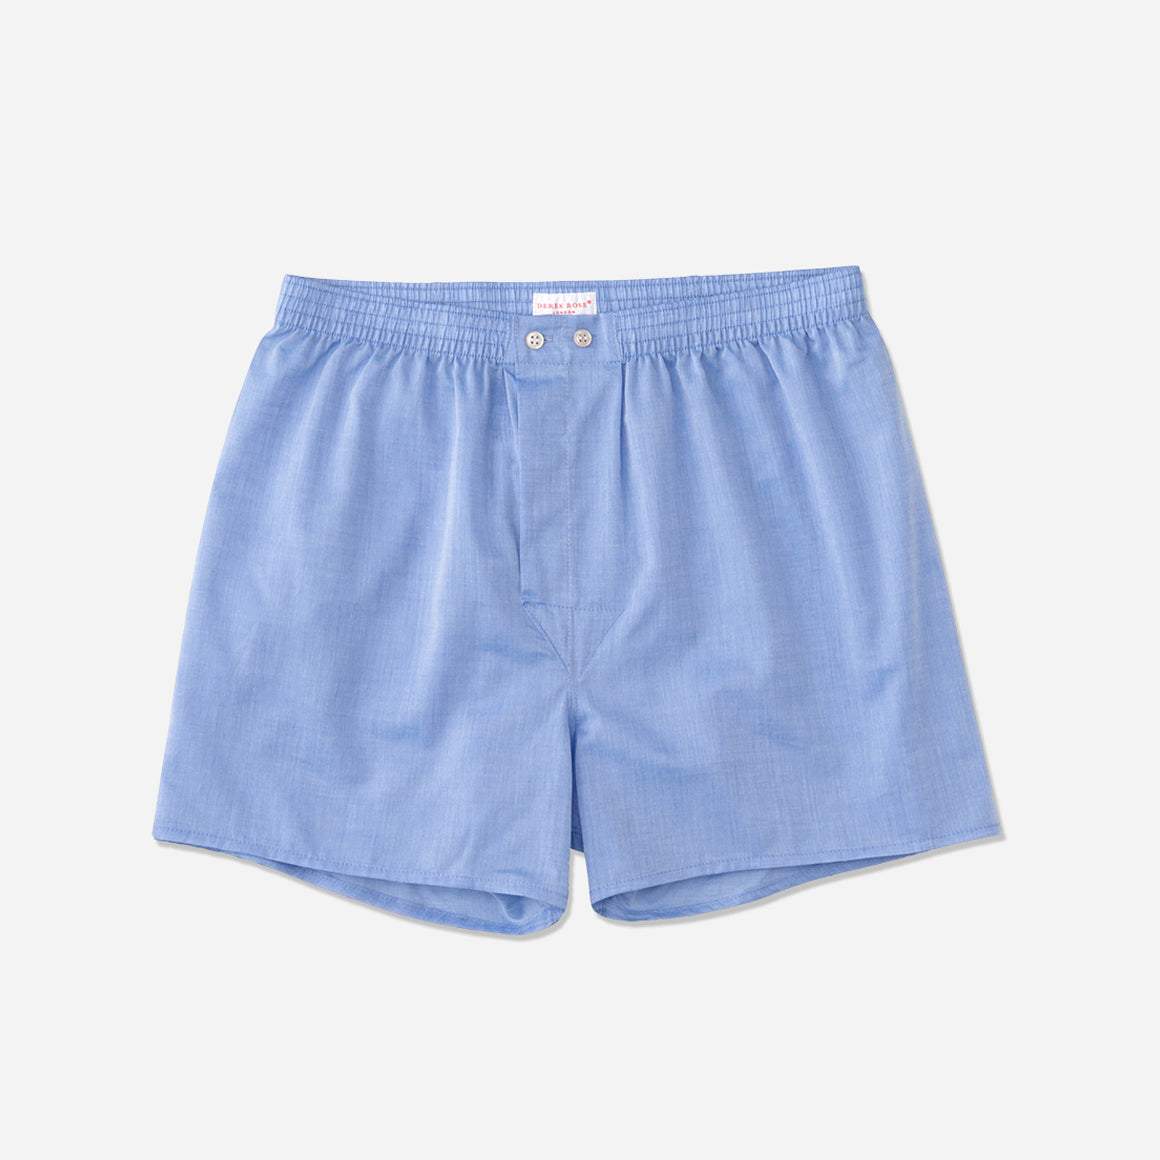 Derek Rose's Amalfi Cotton Classic Fit Boxer in a blue colorway. Shown against light grey background.